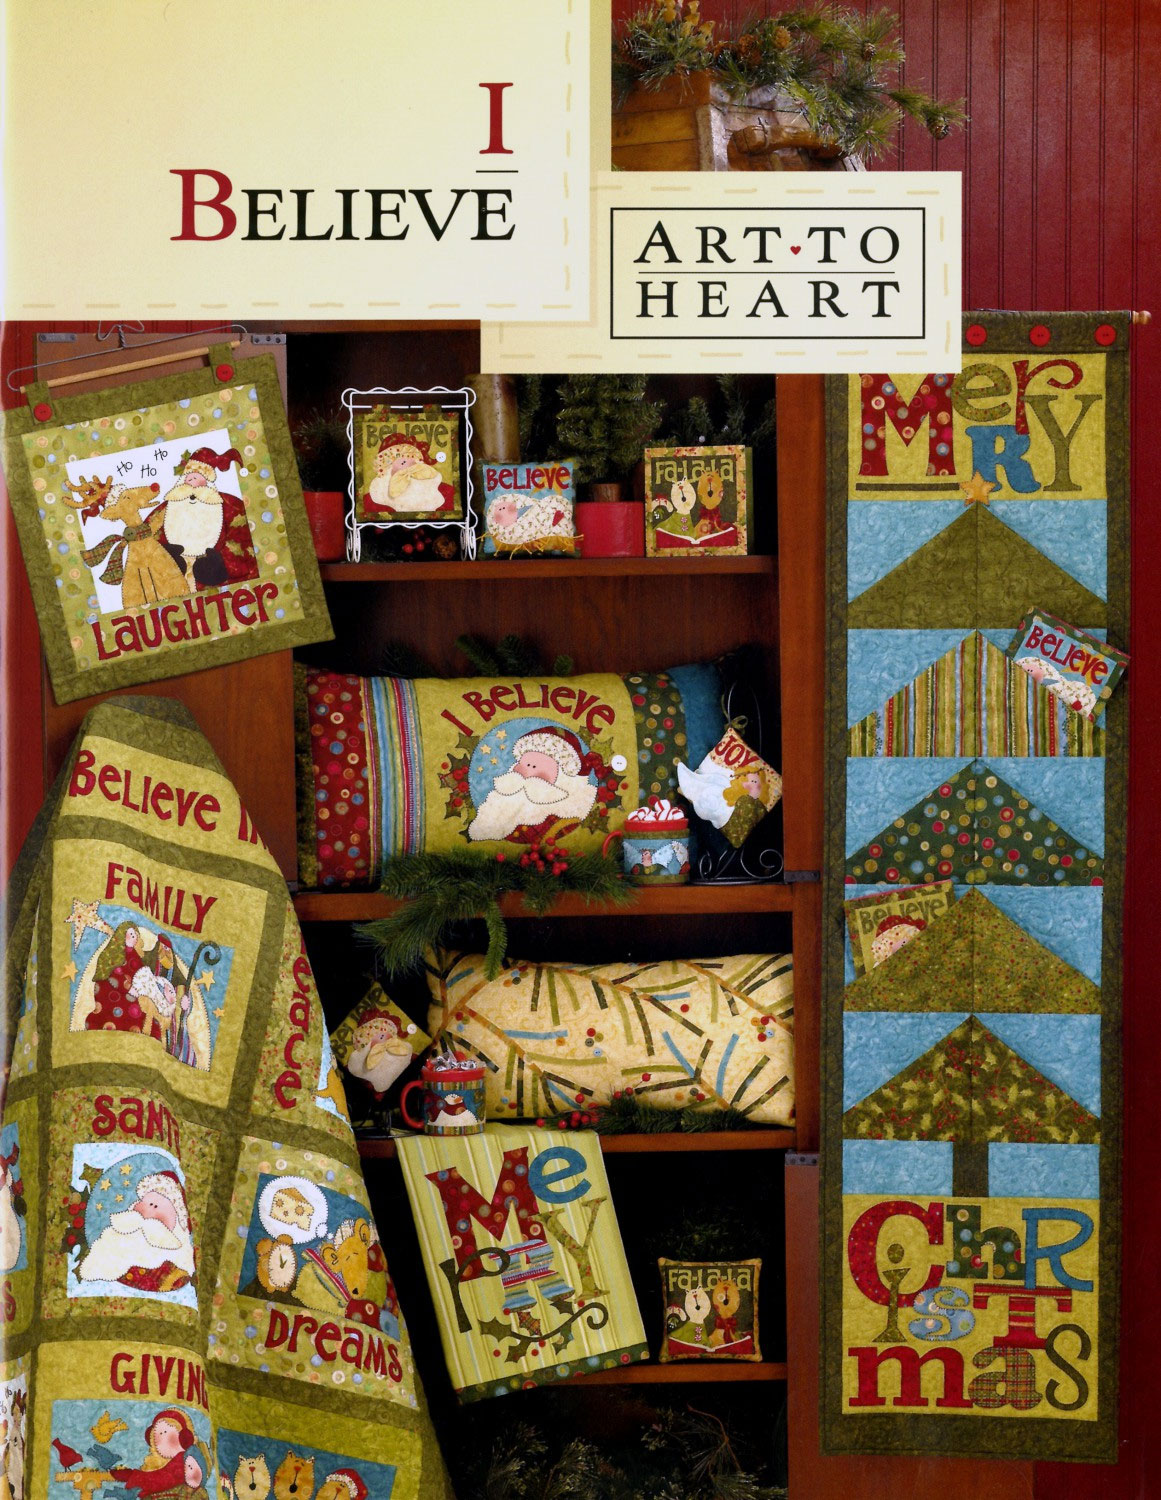 I-Believe-sewing-pattern-book-Art-To-Heart-front